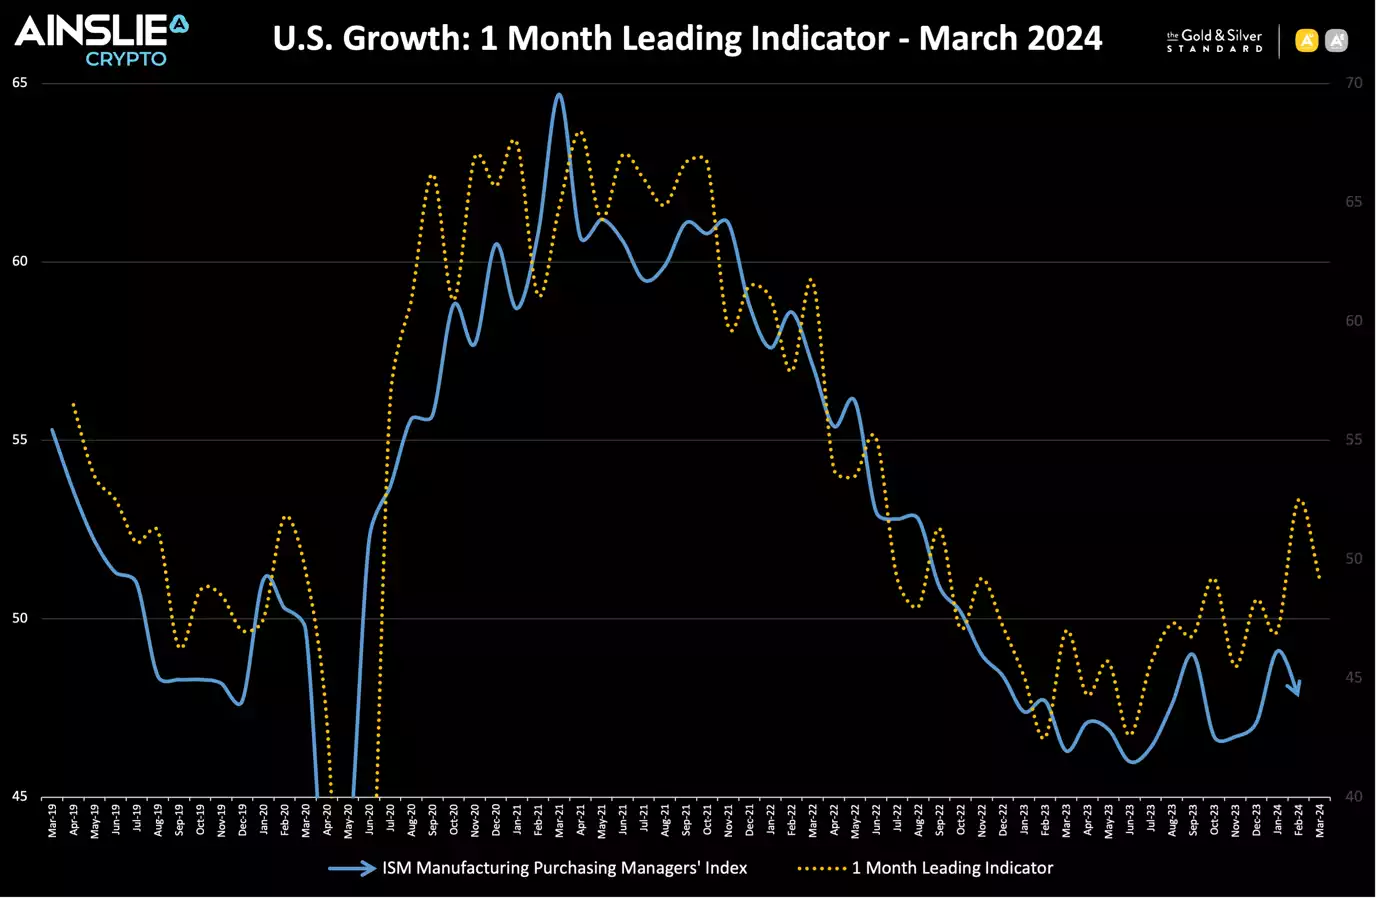 U.S. Growth: 1 Month Leading Indicator - March 2024